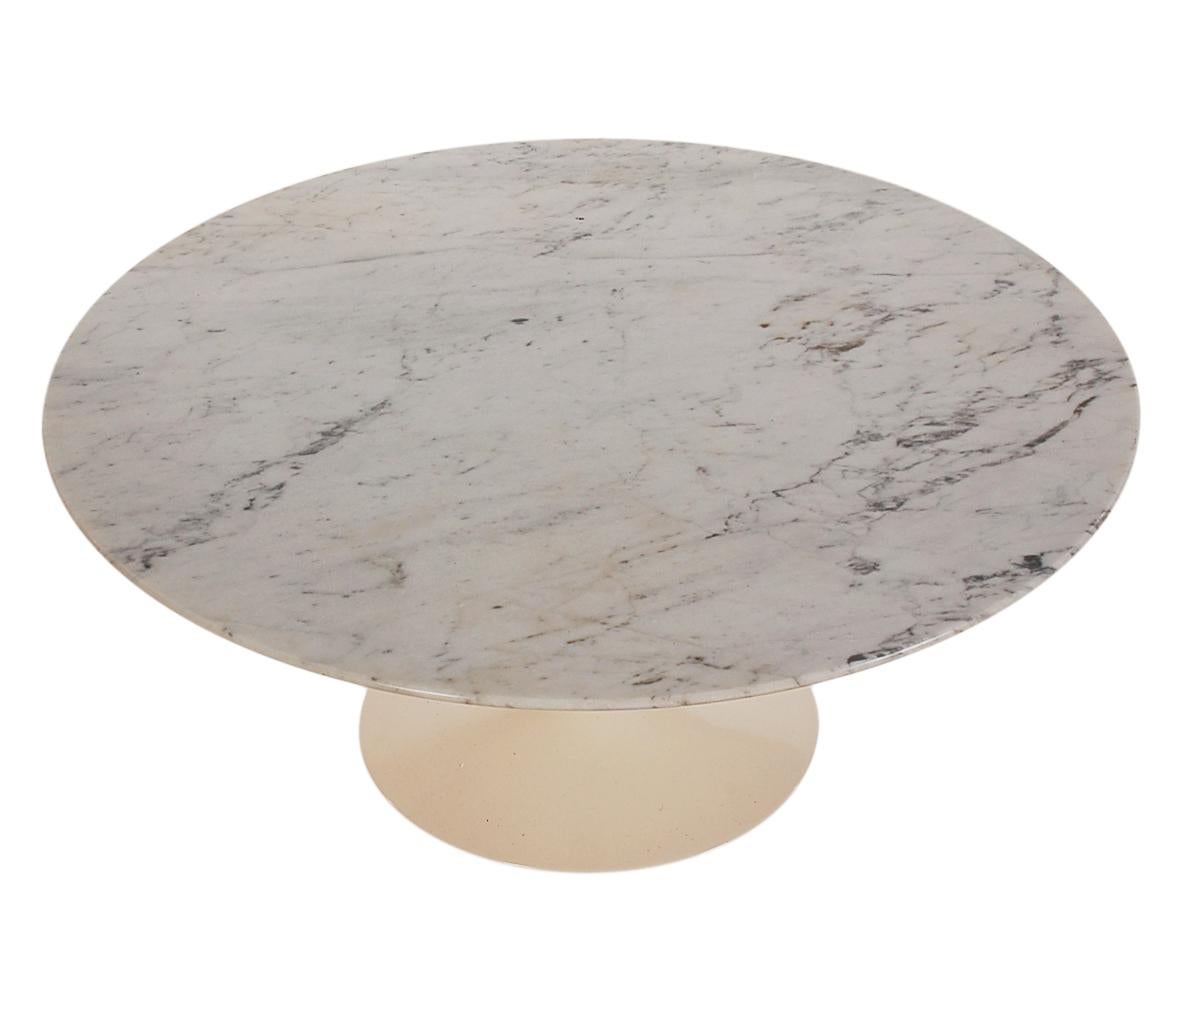 American Mid-Century Modern Marble Tulip Round Cocktail Table by Eero Saarinen for Knoll